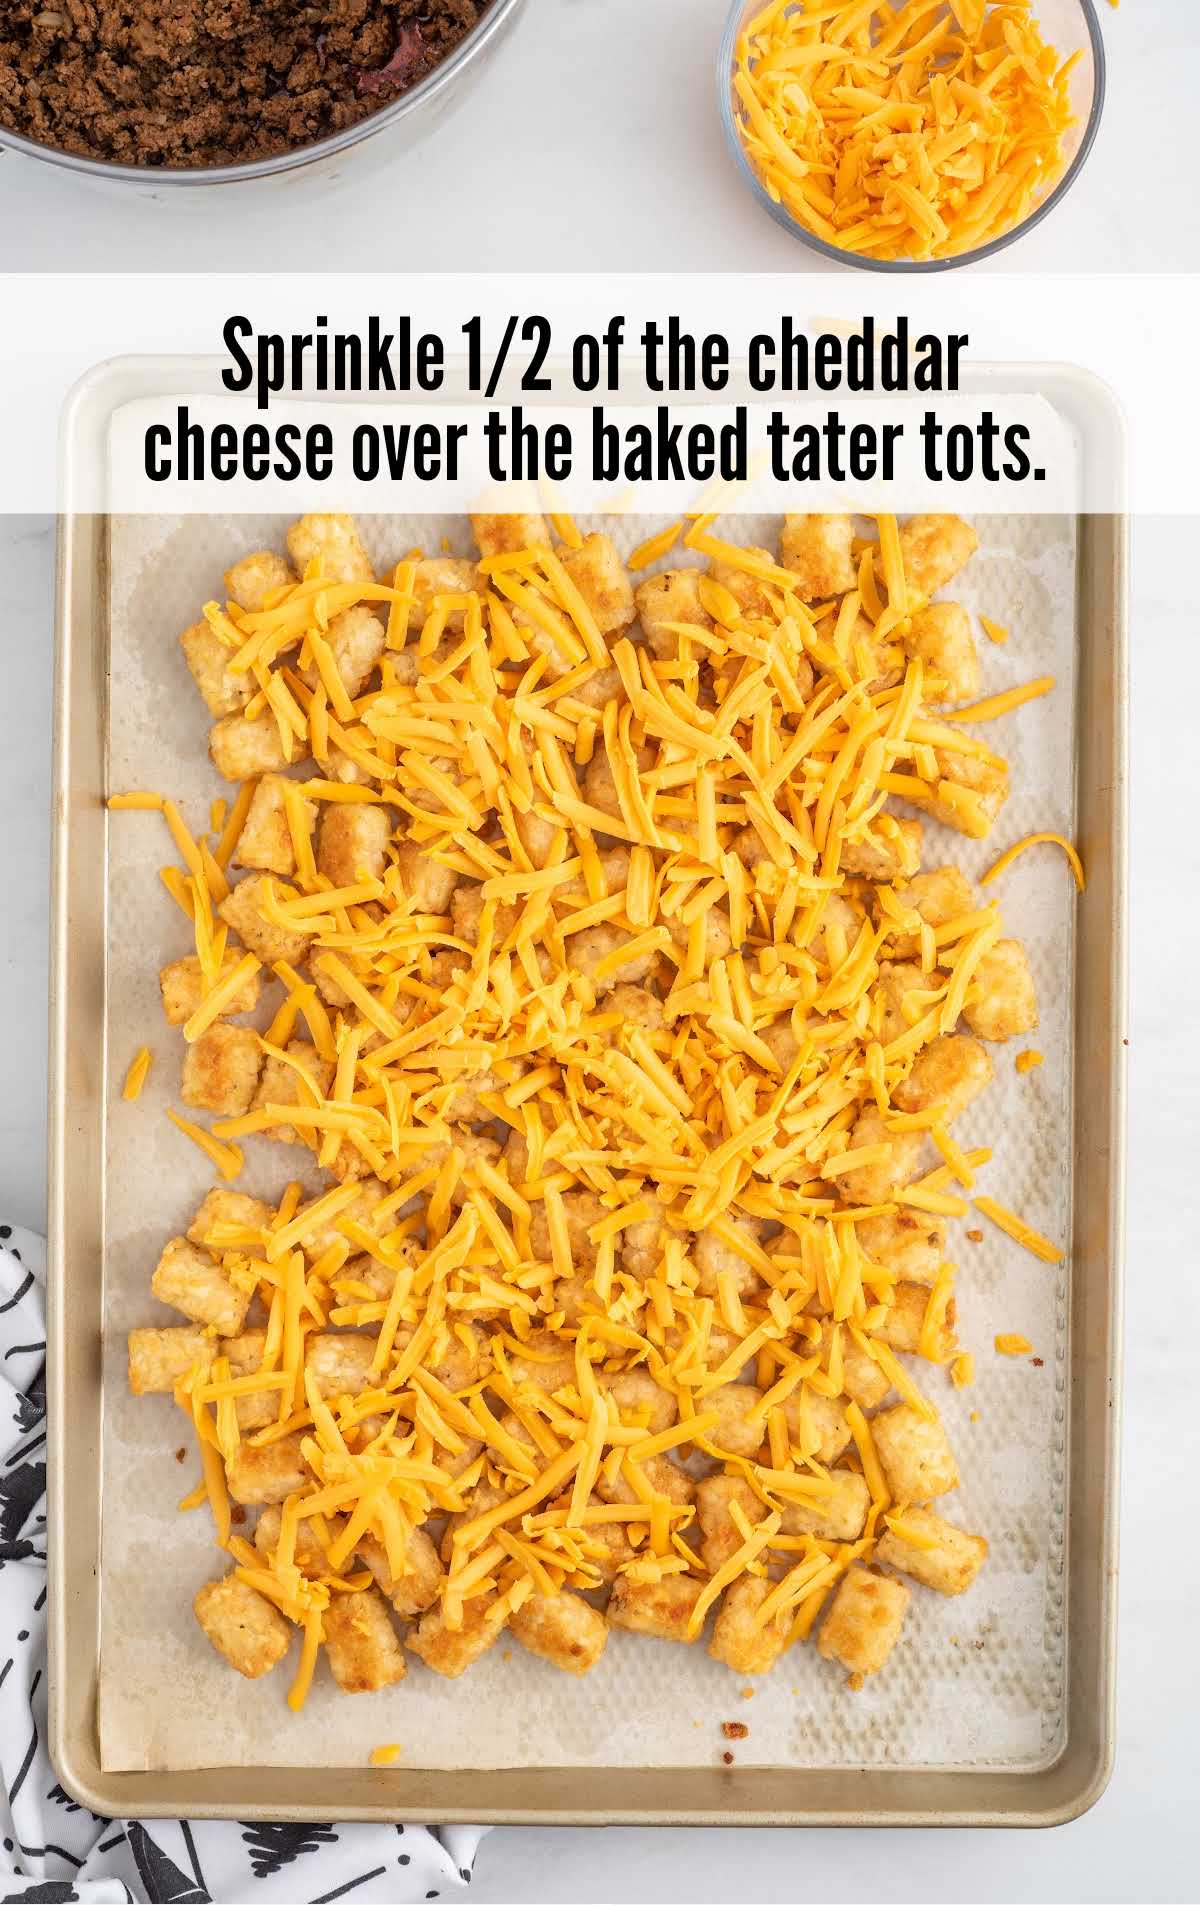 A tray of food, with Nachos and Cheese